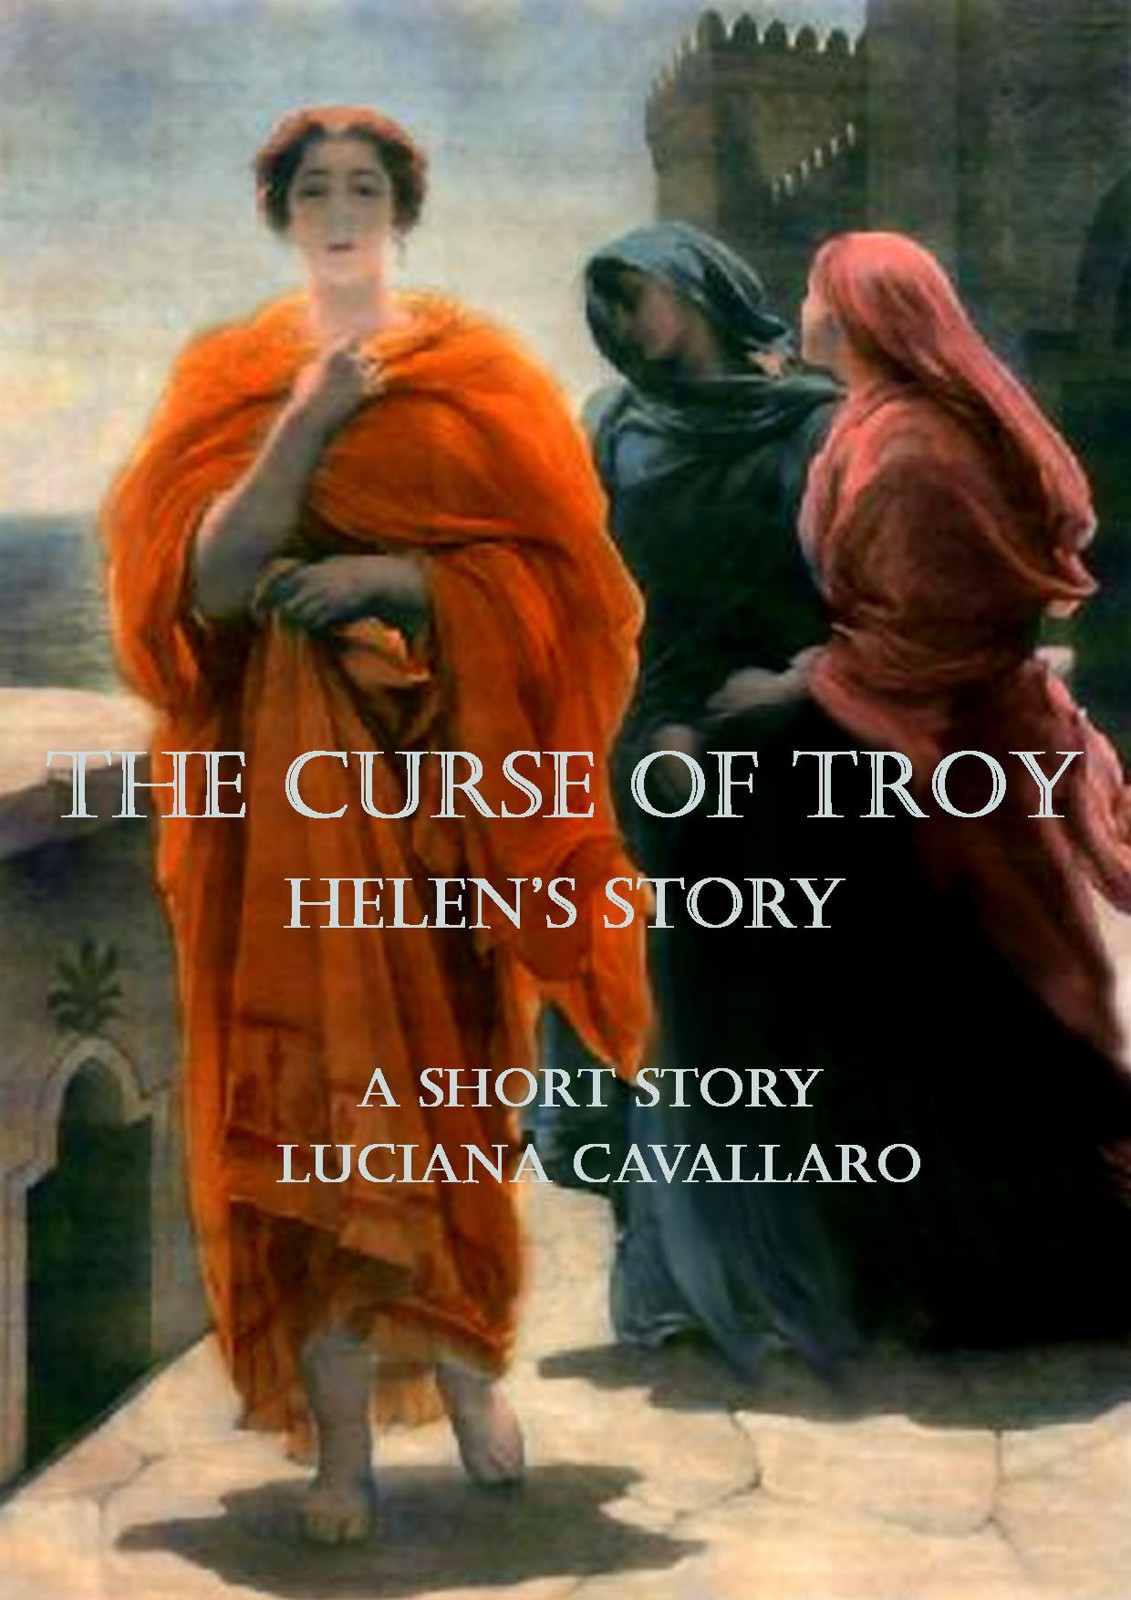 The Curse of Troy